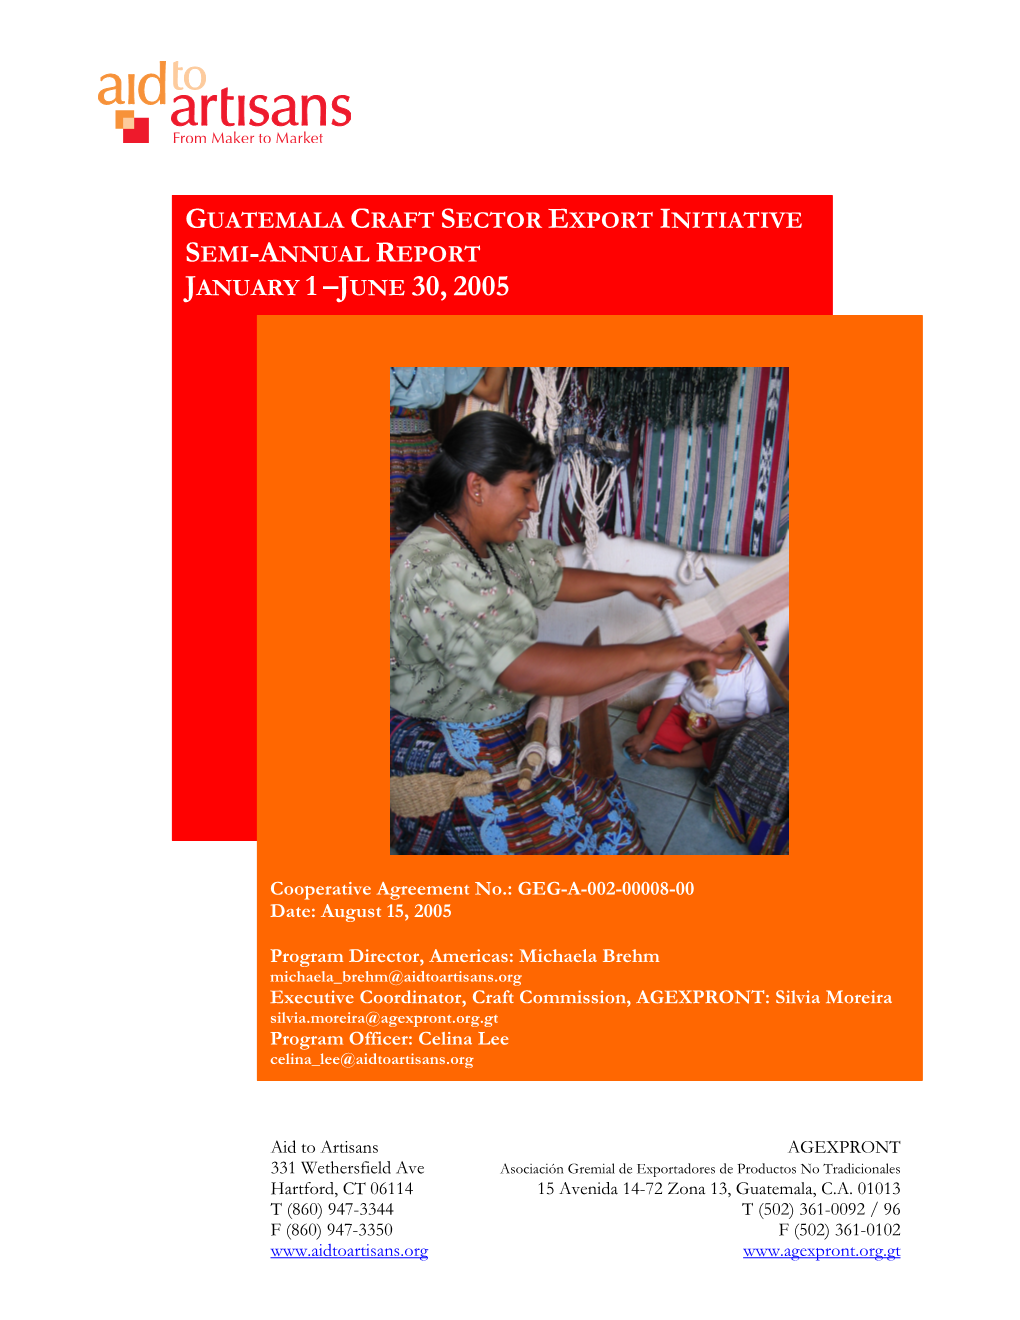 Guatemala Craft Sector Export Initiative Semi-Annual Report January 1 – June 30, 2005 Table of Contents